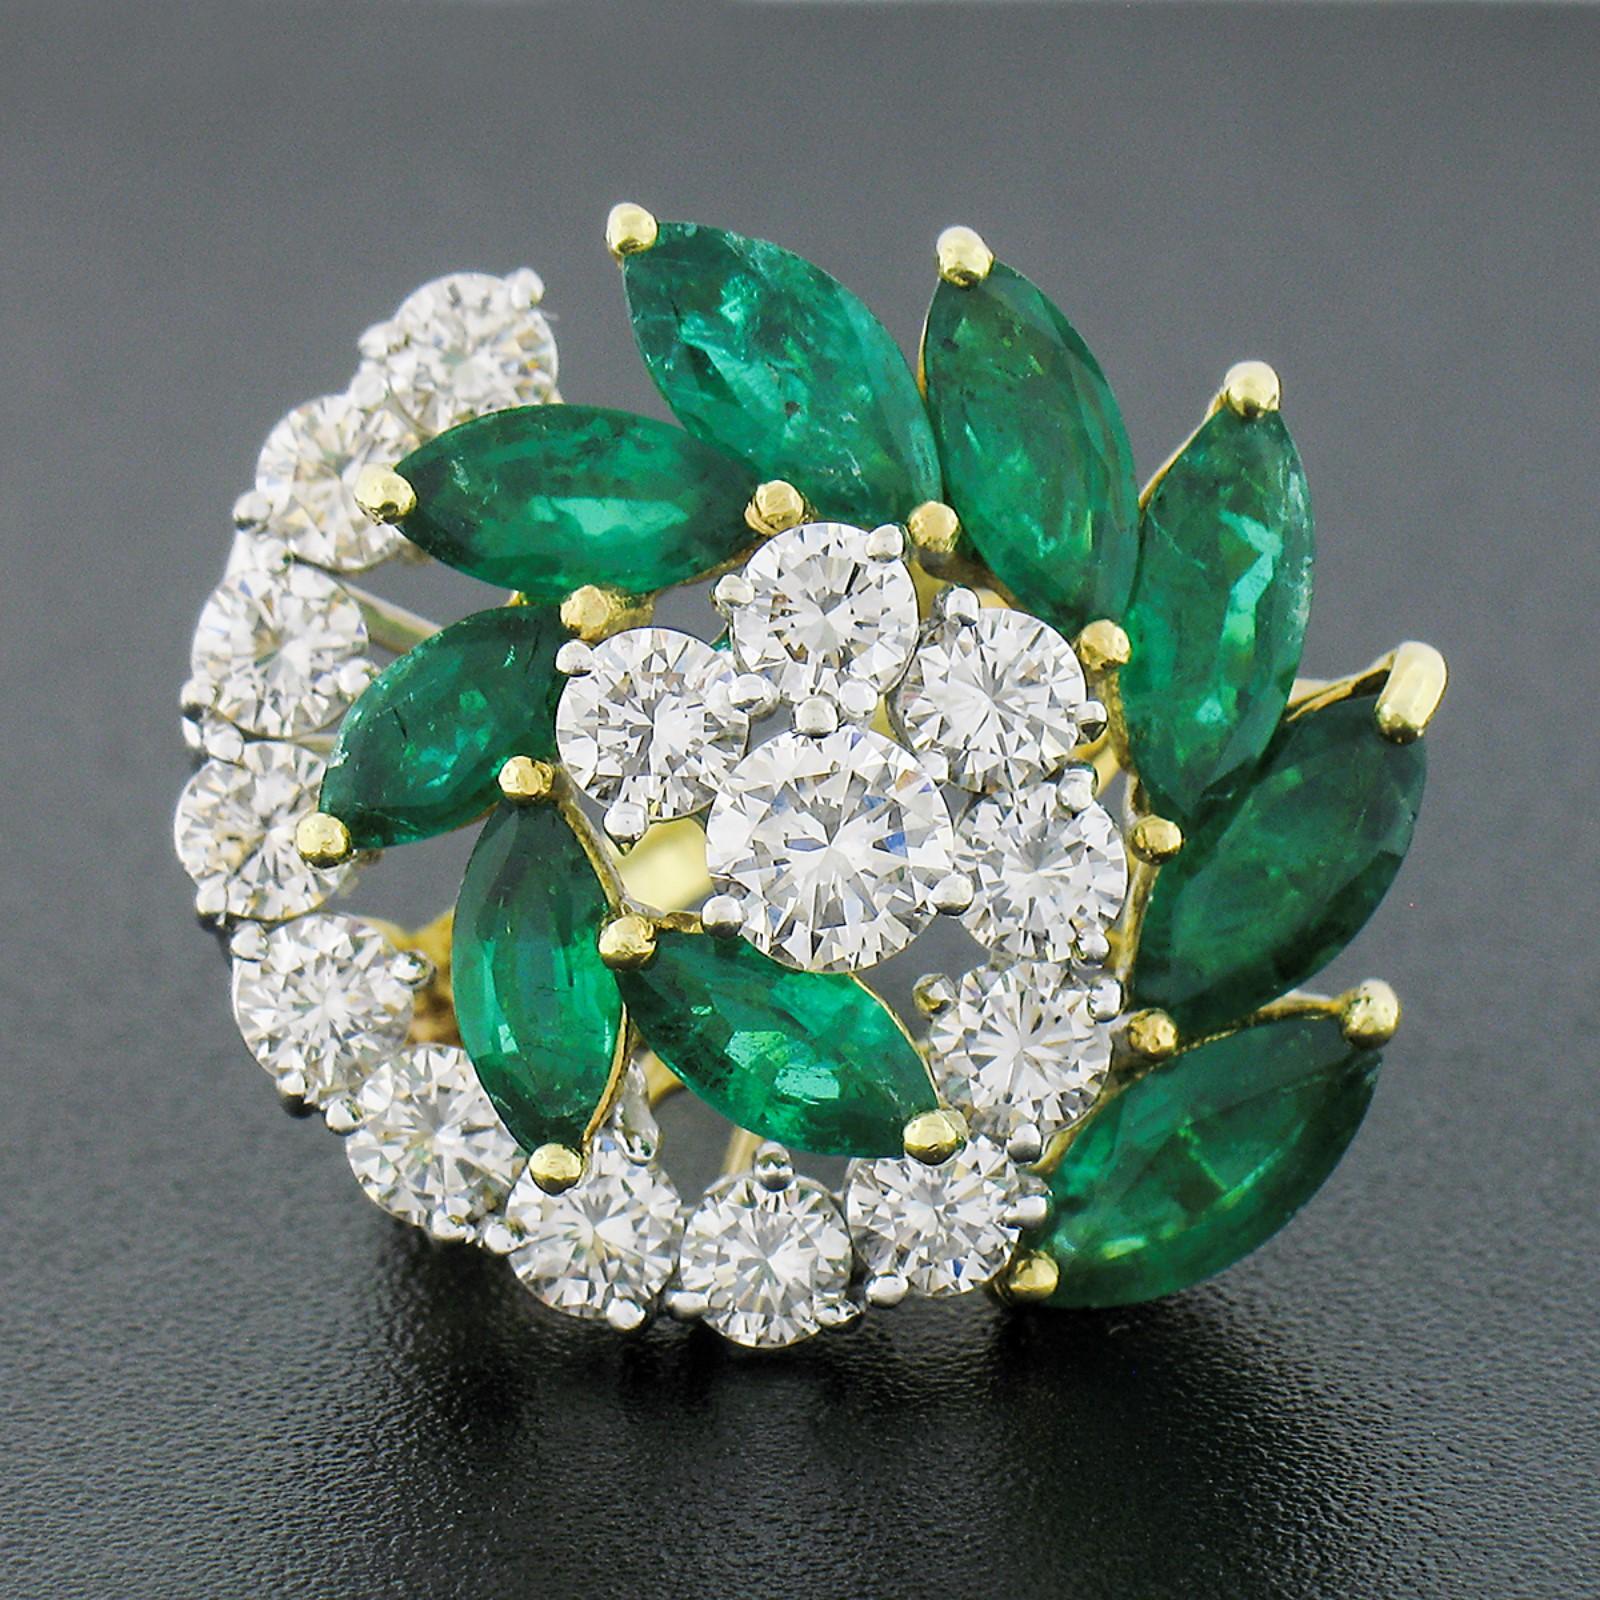 Here we have an absolutely outstanding, vintage, diamond and emerald swirl ring that was crafted from solid 18k yellow and white gold. This ring features a graduated dual-pronged swirl pattern with one prong constructed from round brilliant cut